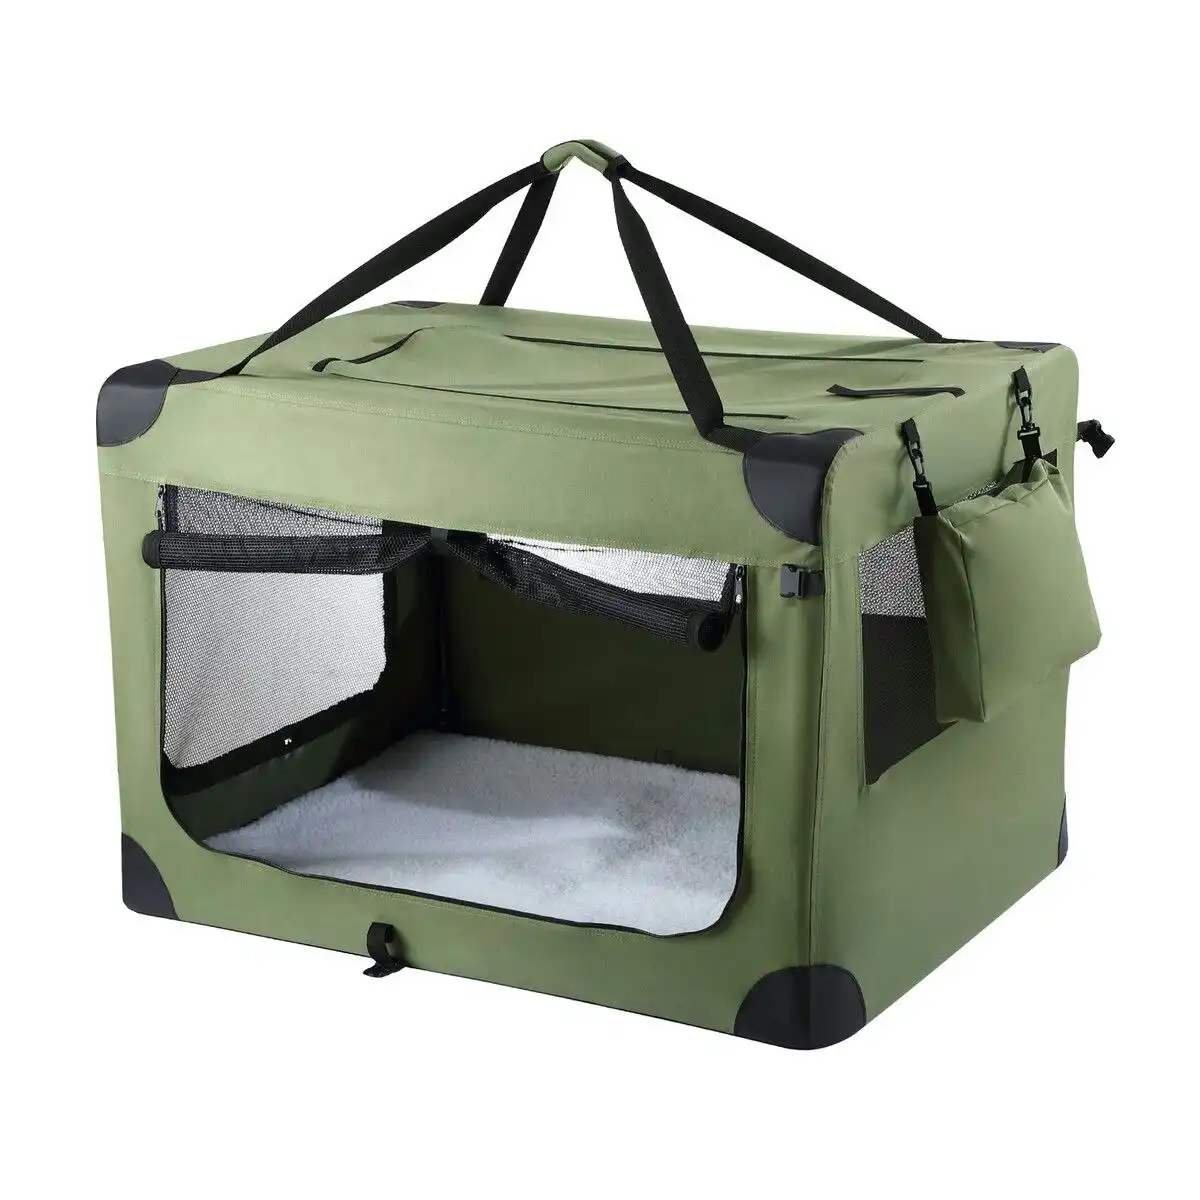 Pet Scene Soft Dog Crate Kennel Pet Cage Cat Travel Carry Bag Extra Large Puppy Carrier Foldable Portable Green 3XL